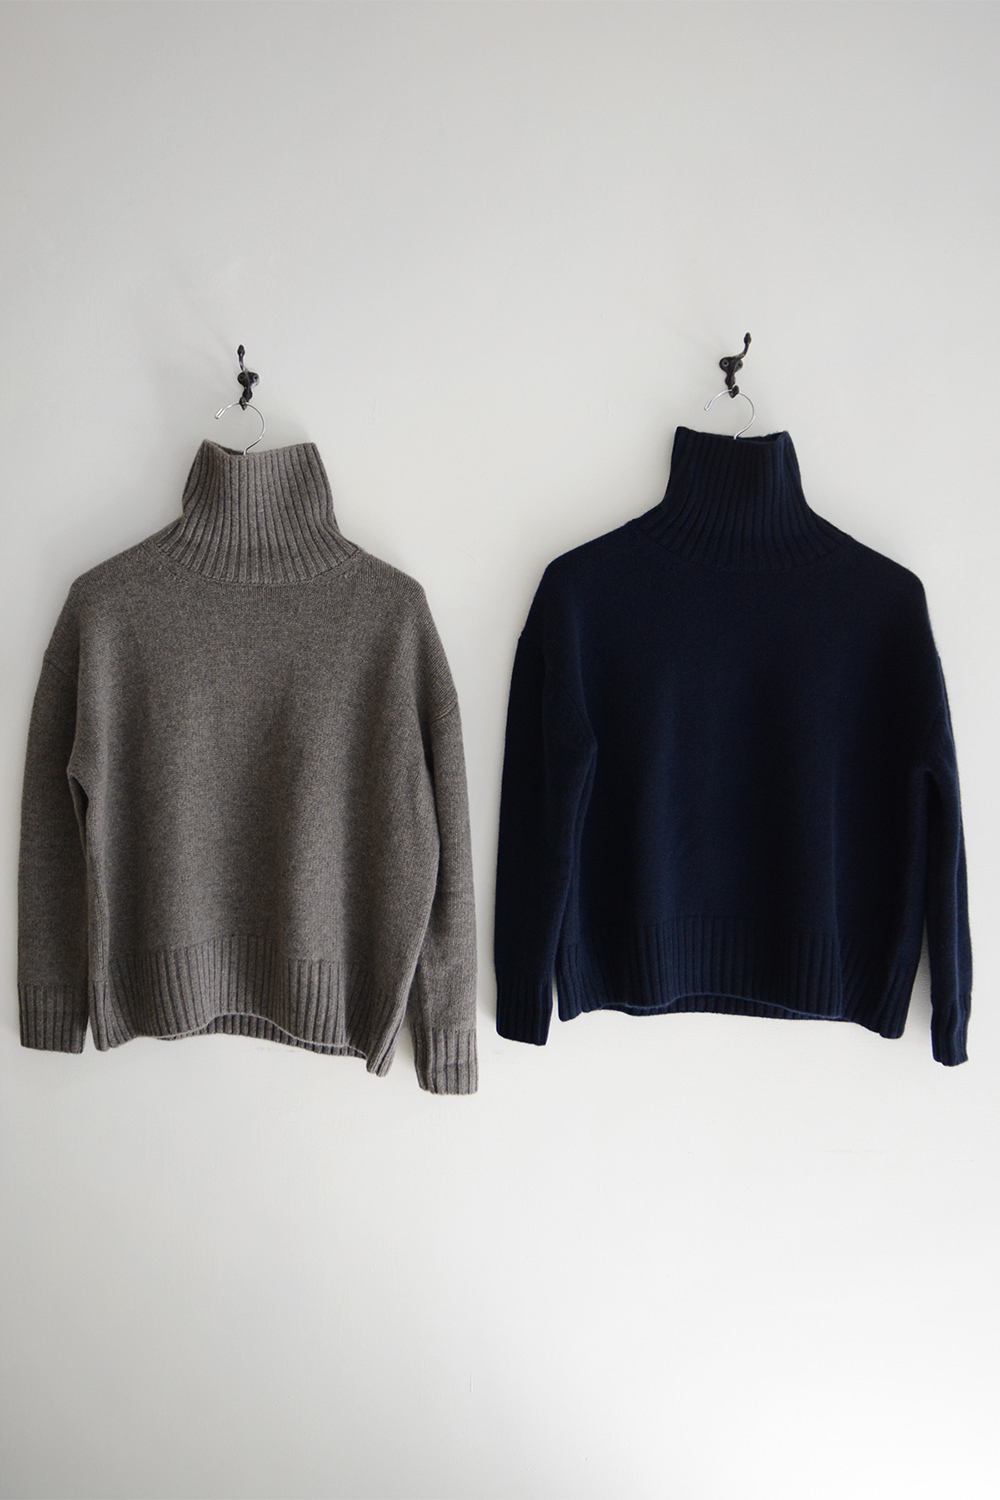 MAKIE Cashmere Turtle Neck Sweaters A Top Picture